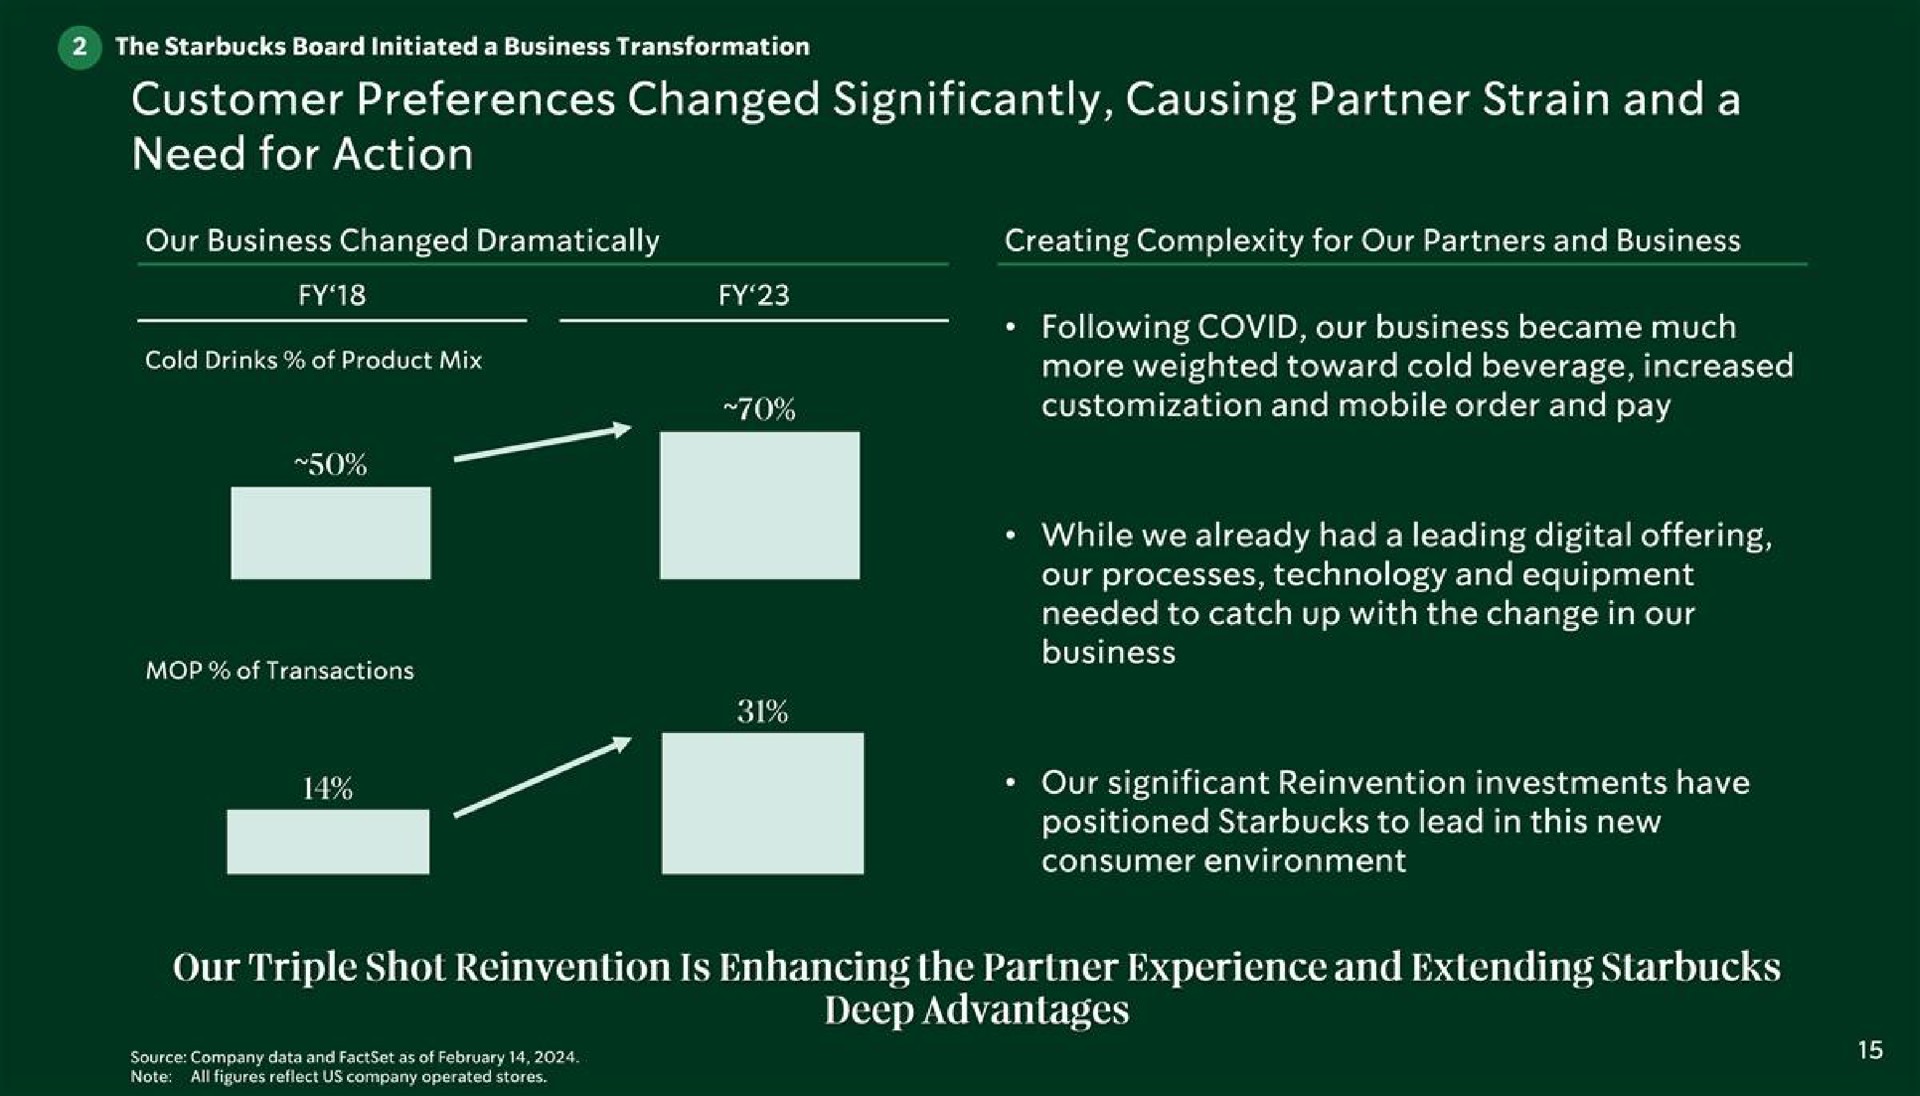 customer preferences changed significantly causing partner strain and a need for action a ere aces sen dare more weighted toward cold beverage increased our triple shot reinvention is enhancing the partner experience and extending deep advantages | Starbucks